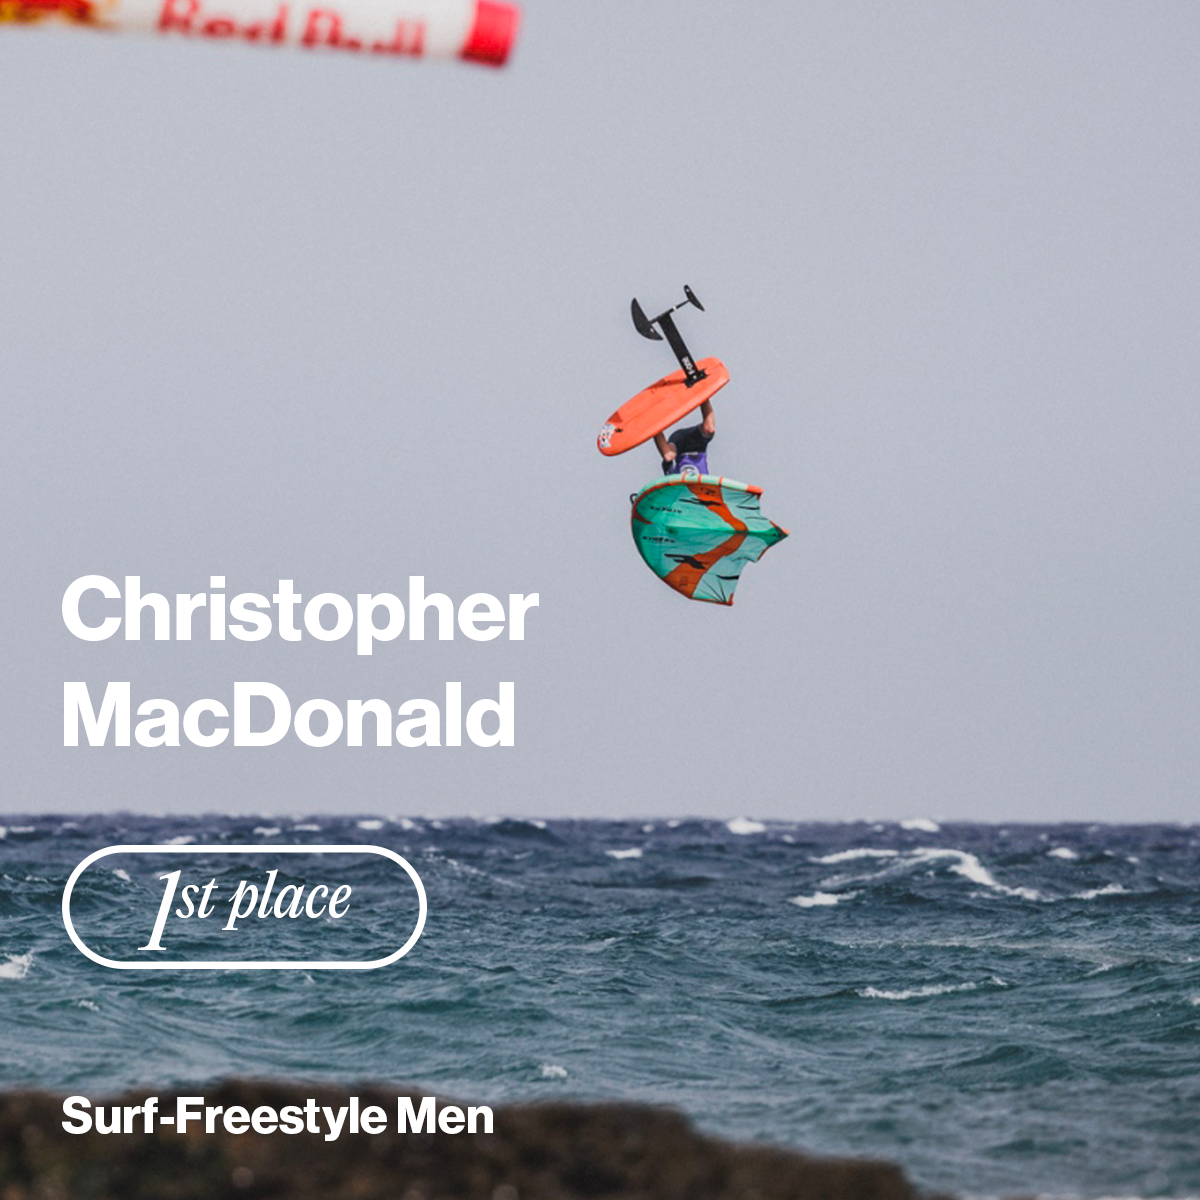 Christopher MacDonald wins first place in Surf-Freestyle ! 1